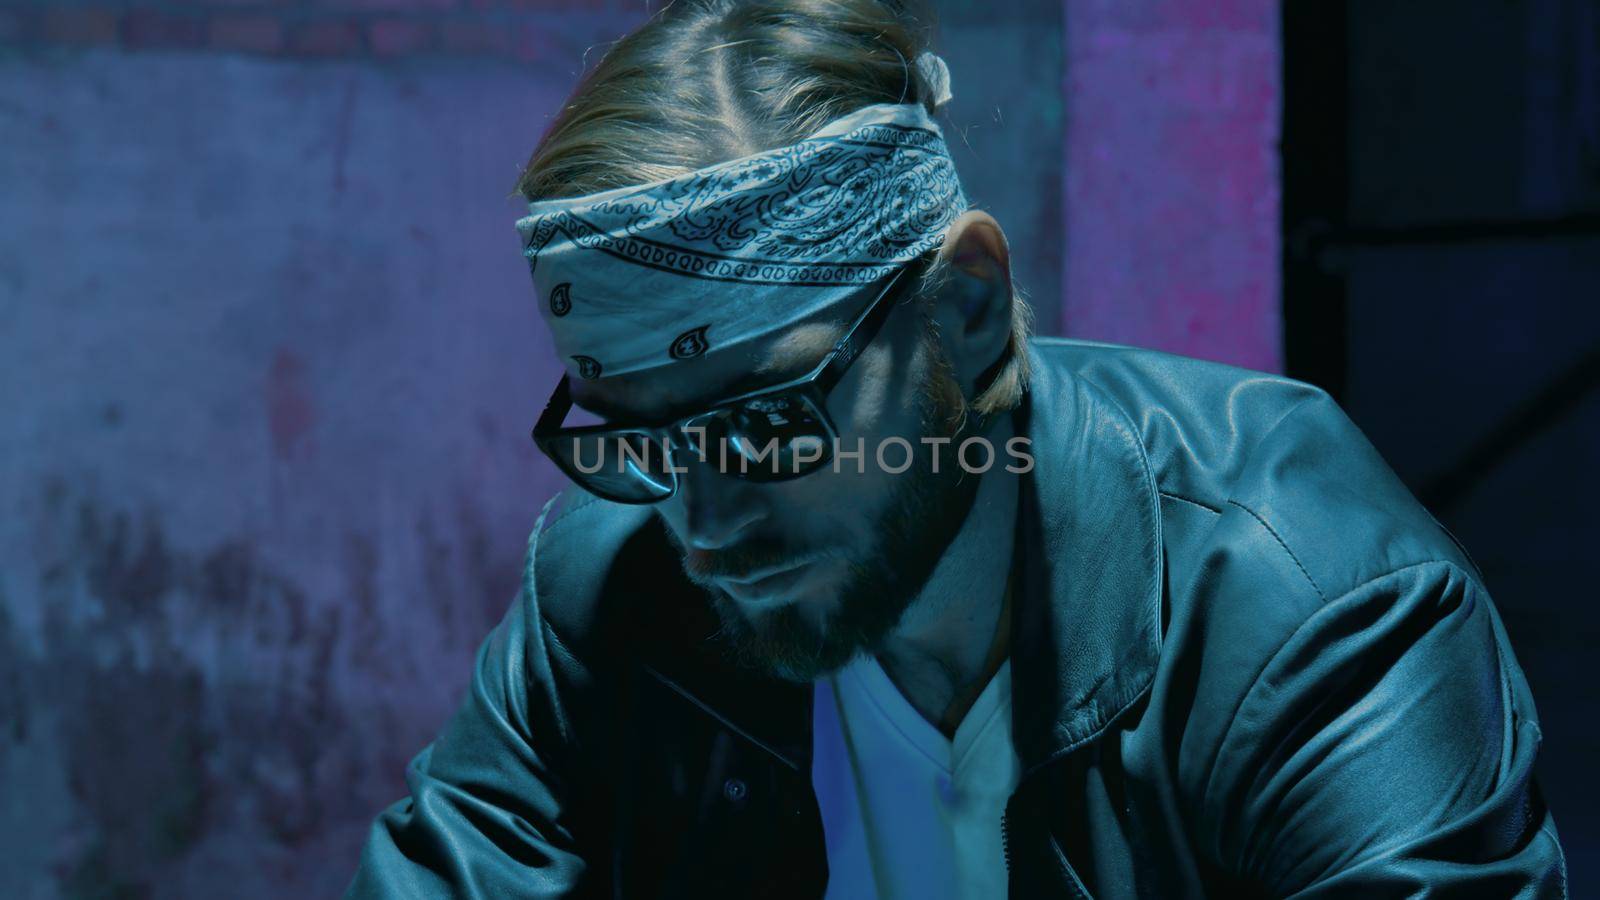 Male biker in a bandana in sunglasses against a brick wall with a neon sign by studiodav